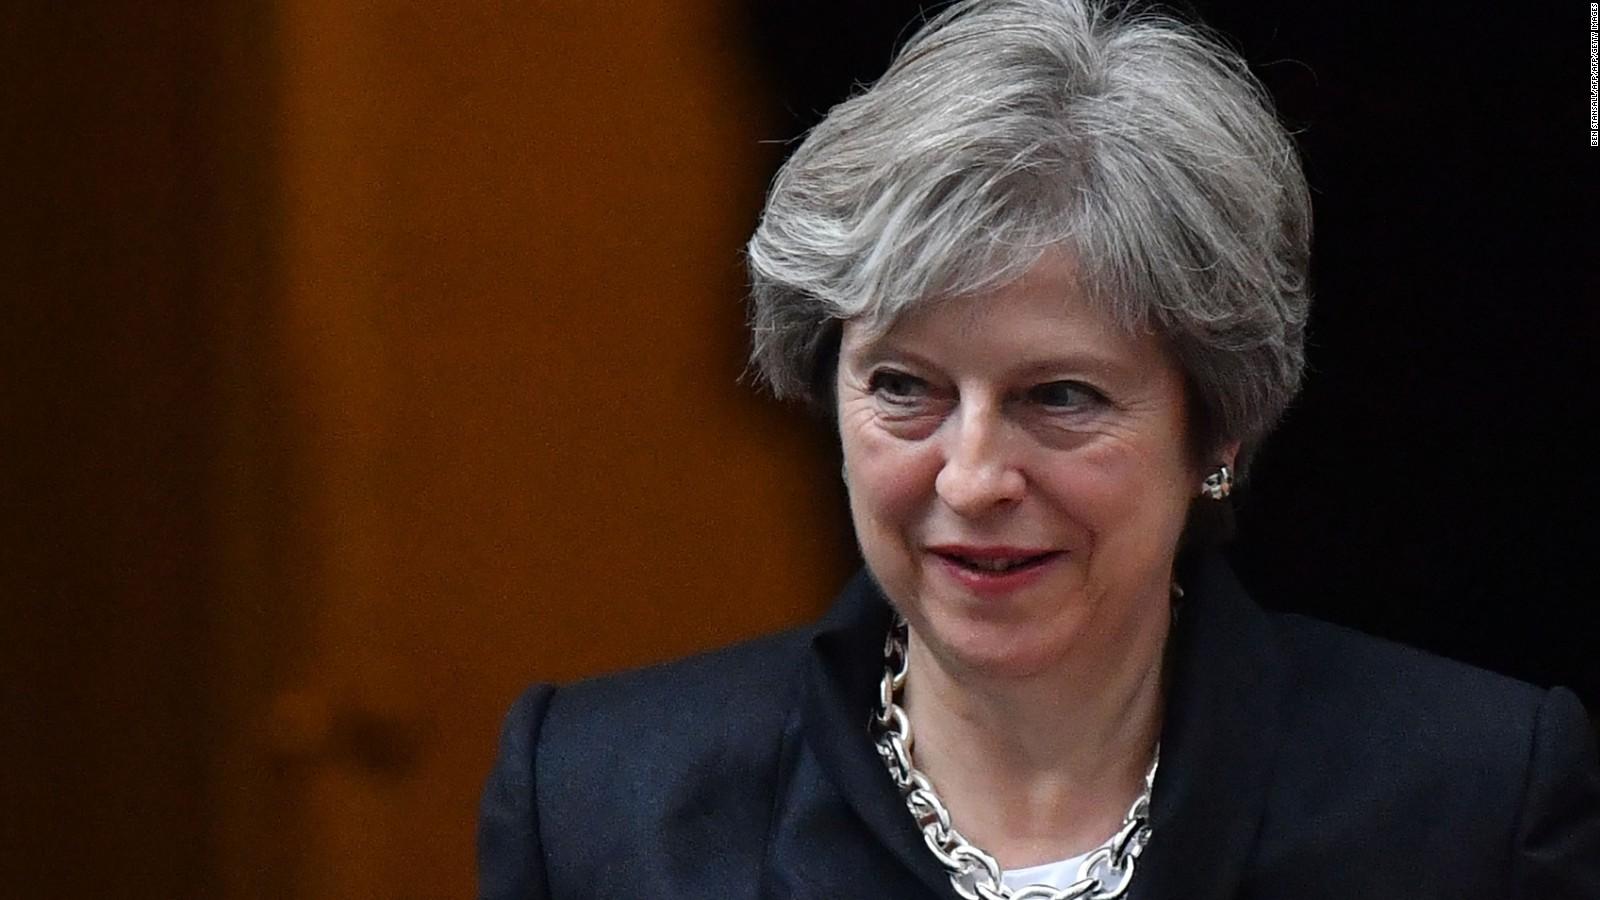 Is Theresa May's luck about to run out?